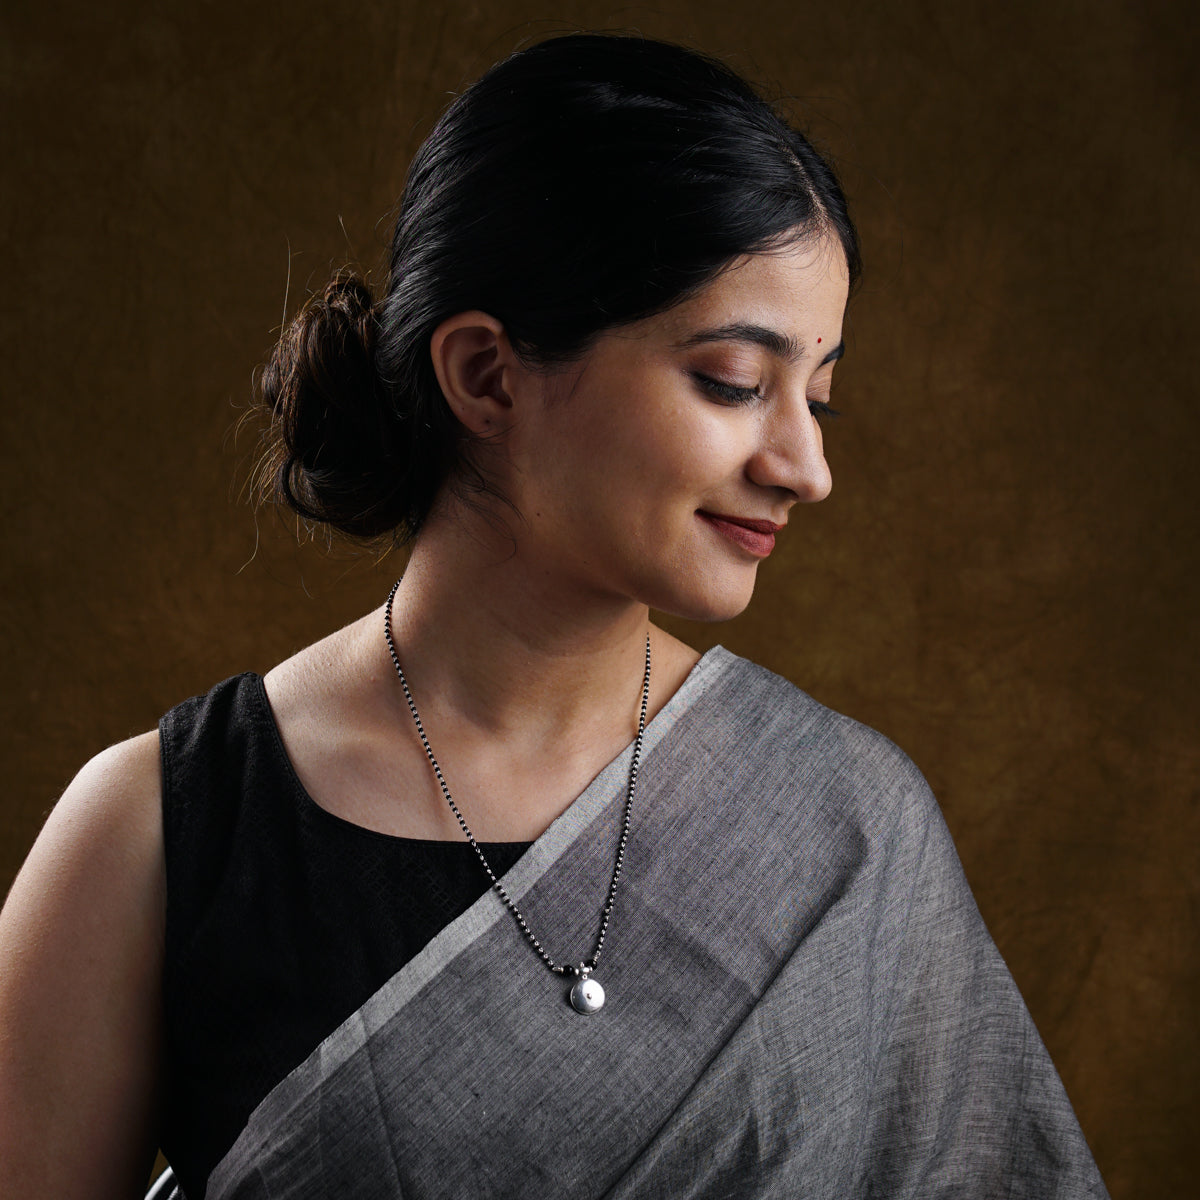 a woman in a black and white sari holding a cell phone